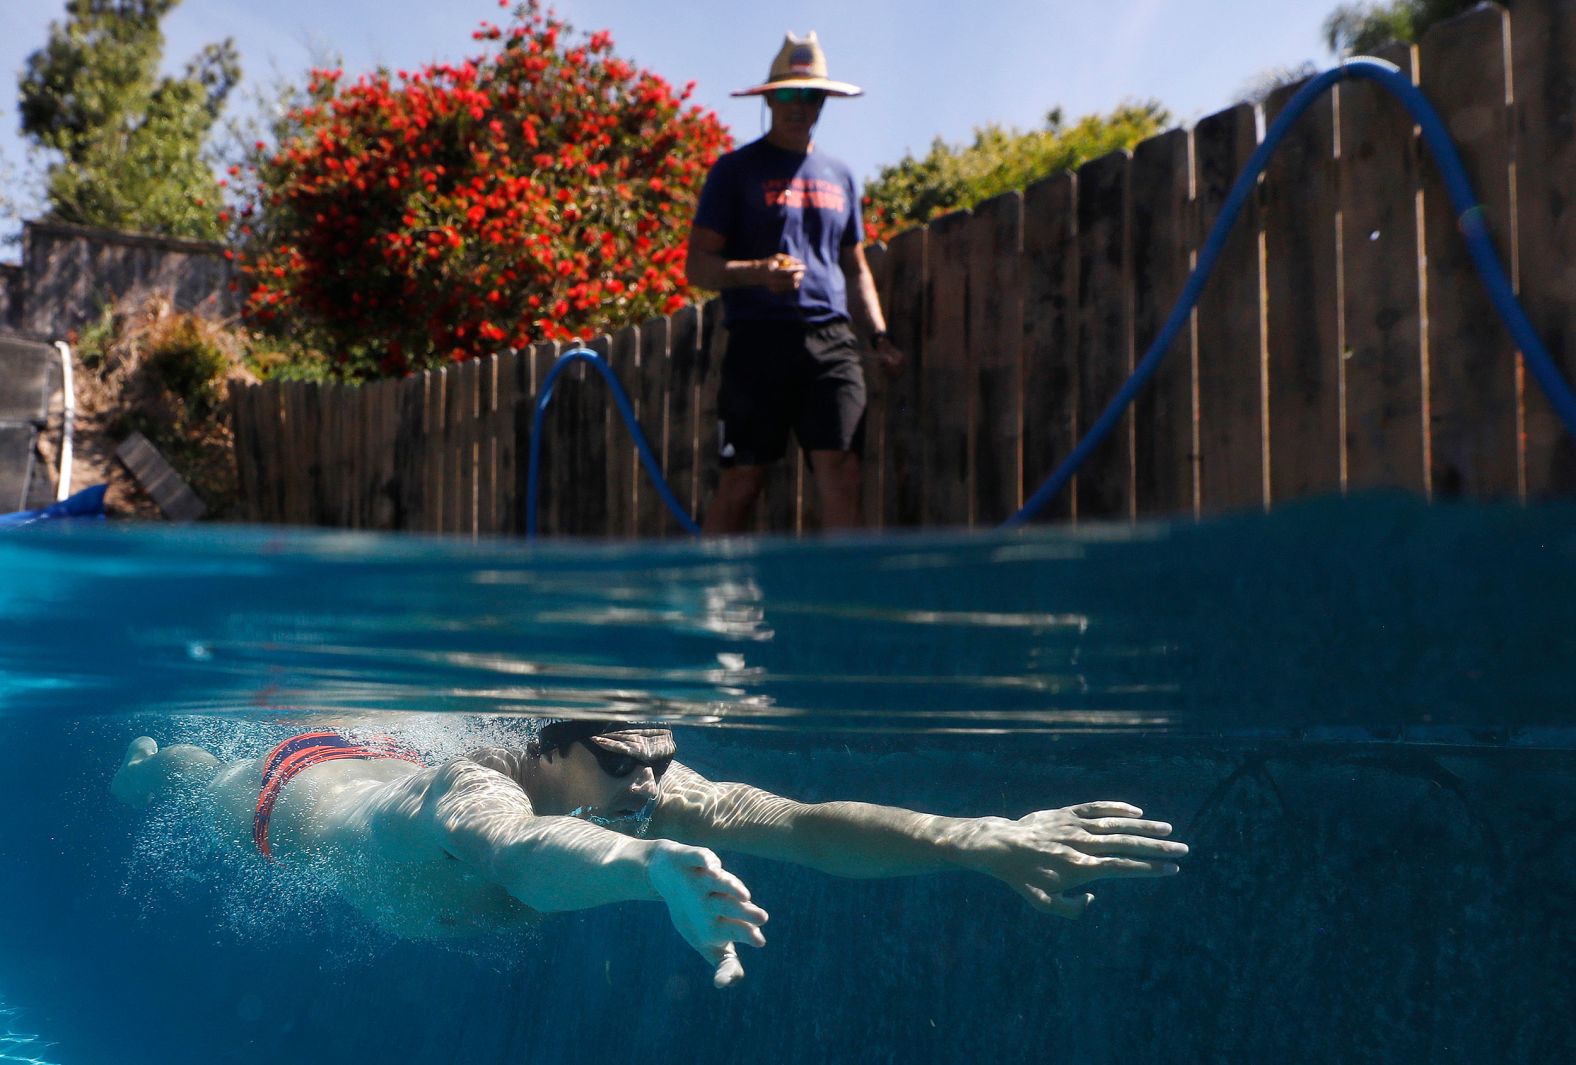 US Olympian Michael Andrew is coached by his father, Peter, as he trains in a residential pool in San Diego on May 6.